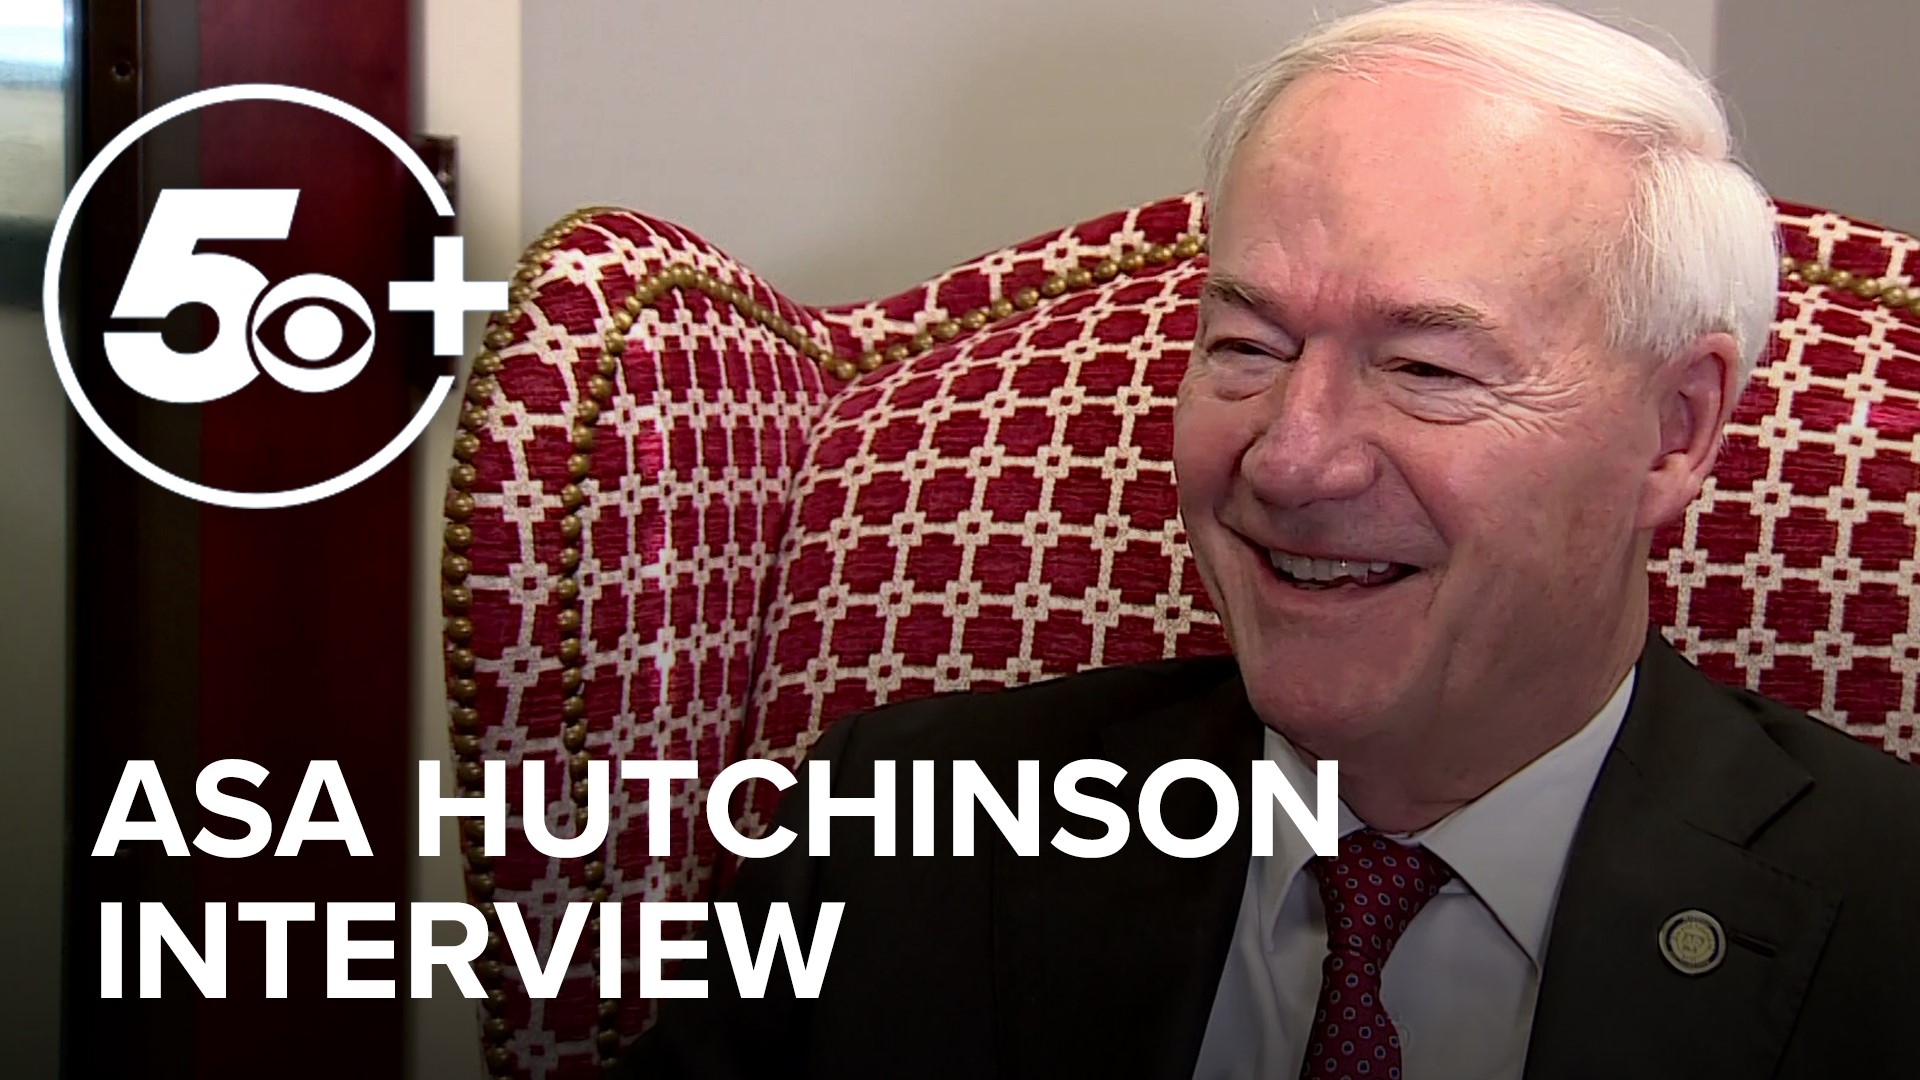 Former Arkansas governor Asa Hutchinson sat down with Daren Bobb and talked about his future plans and all he's learned while running for president.